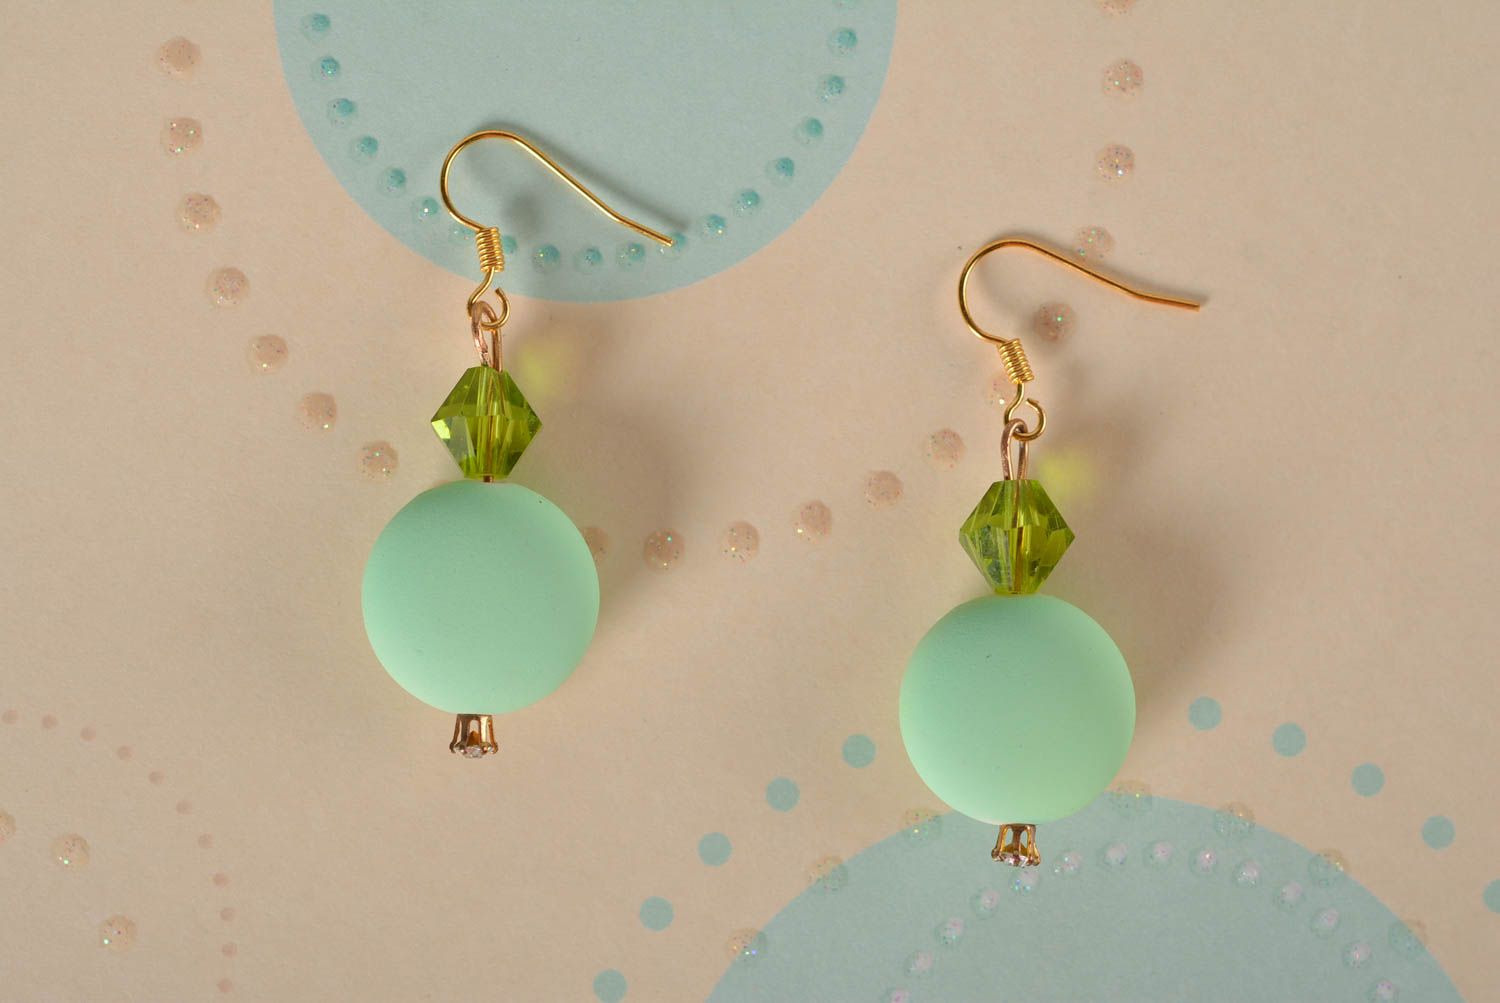 Stone jewelry designer earrings homemade jewelry fashion accessories gift ideas photo 1